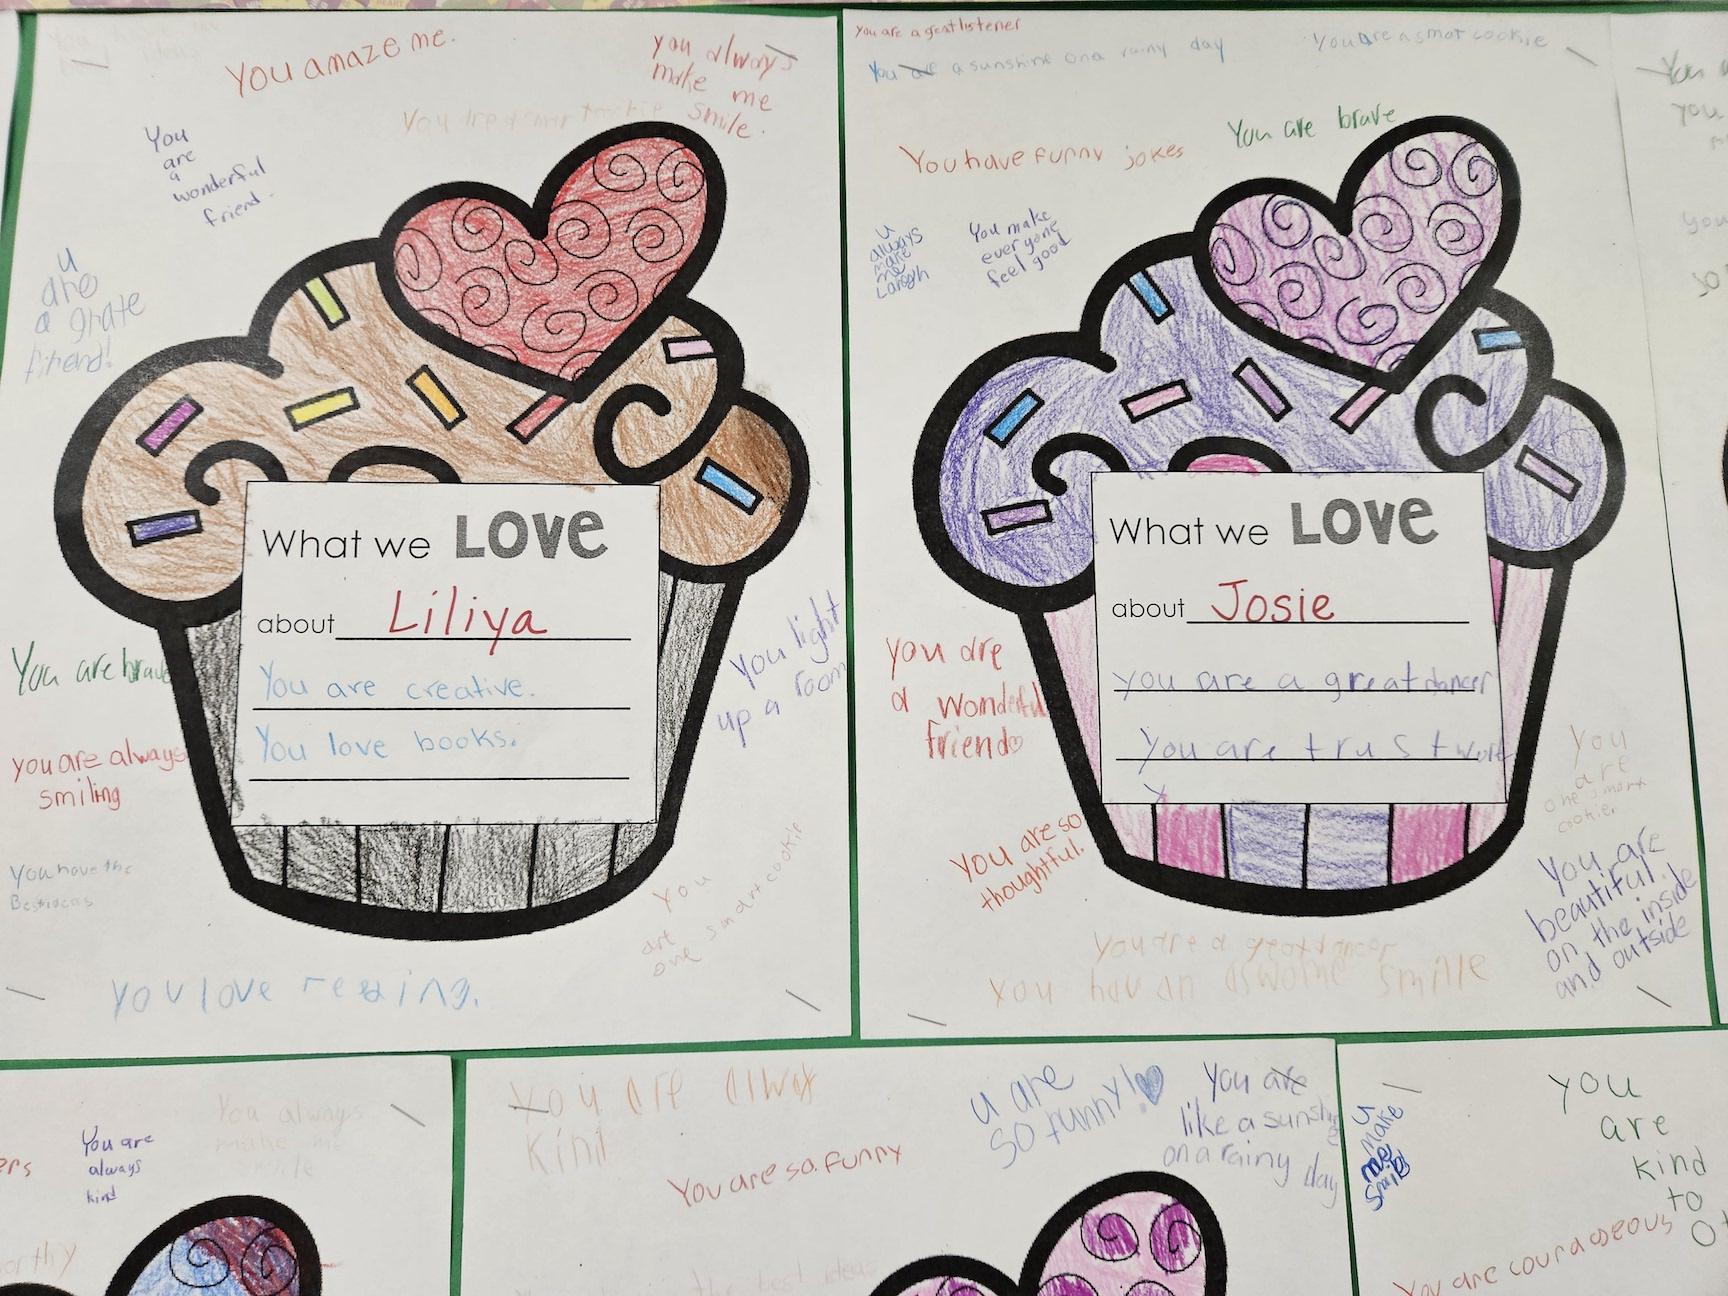 Each student’s cupcake listed some positive character traits